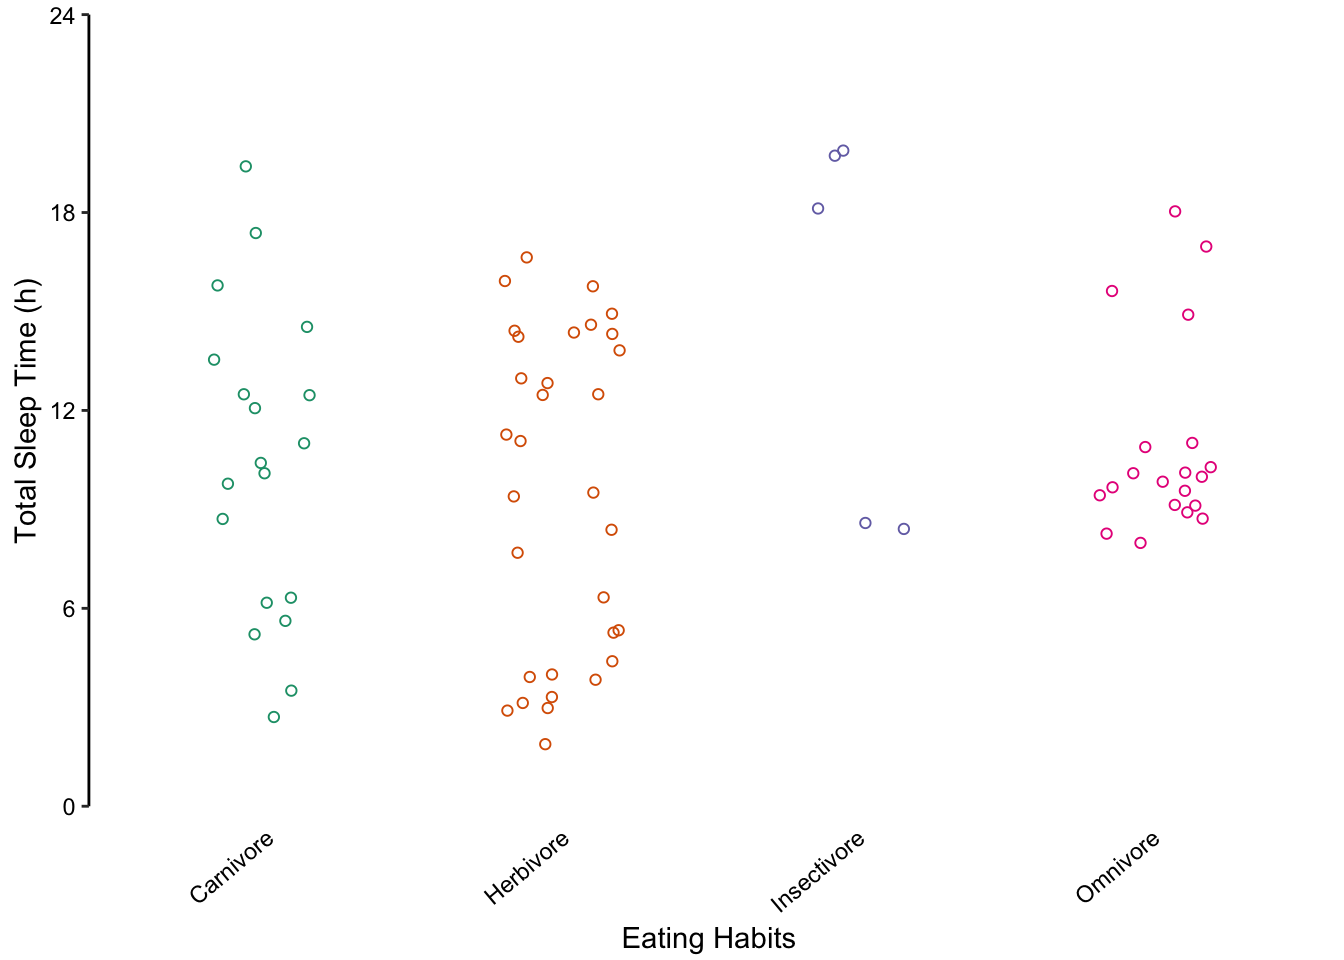 Jittered points are a reasonable alternative to bar plots for depicting the distribution of a data set, in this case the total sleep time according to eating behaviour. _First plot_: Individual observations plotted as a dot plot reveal the entire data set's distribution. _Second plot_: A bar chart showing only the mean and SD masks the underlying distribution. _Third plot_: A simplified dot plot for mean and SD is an improvement, but still obscures the underlying data. _Fourth plot_: Overlaying the individual data points with the mean and SD provide both the distribution and descriptive statistics.